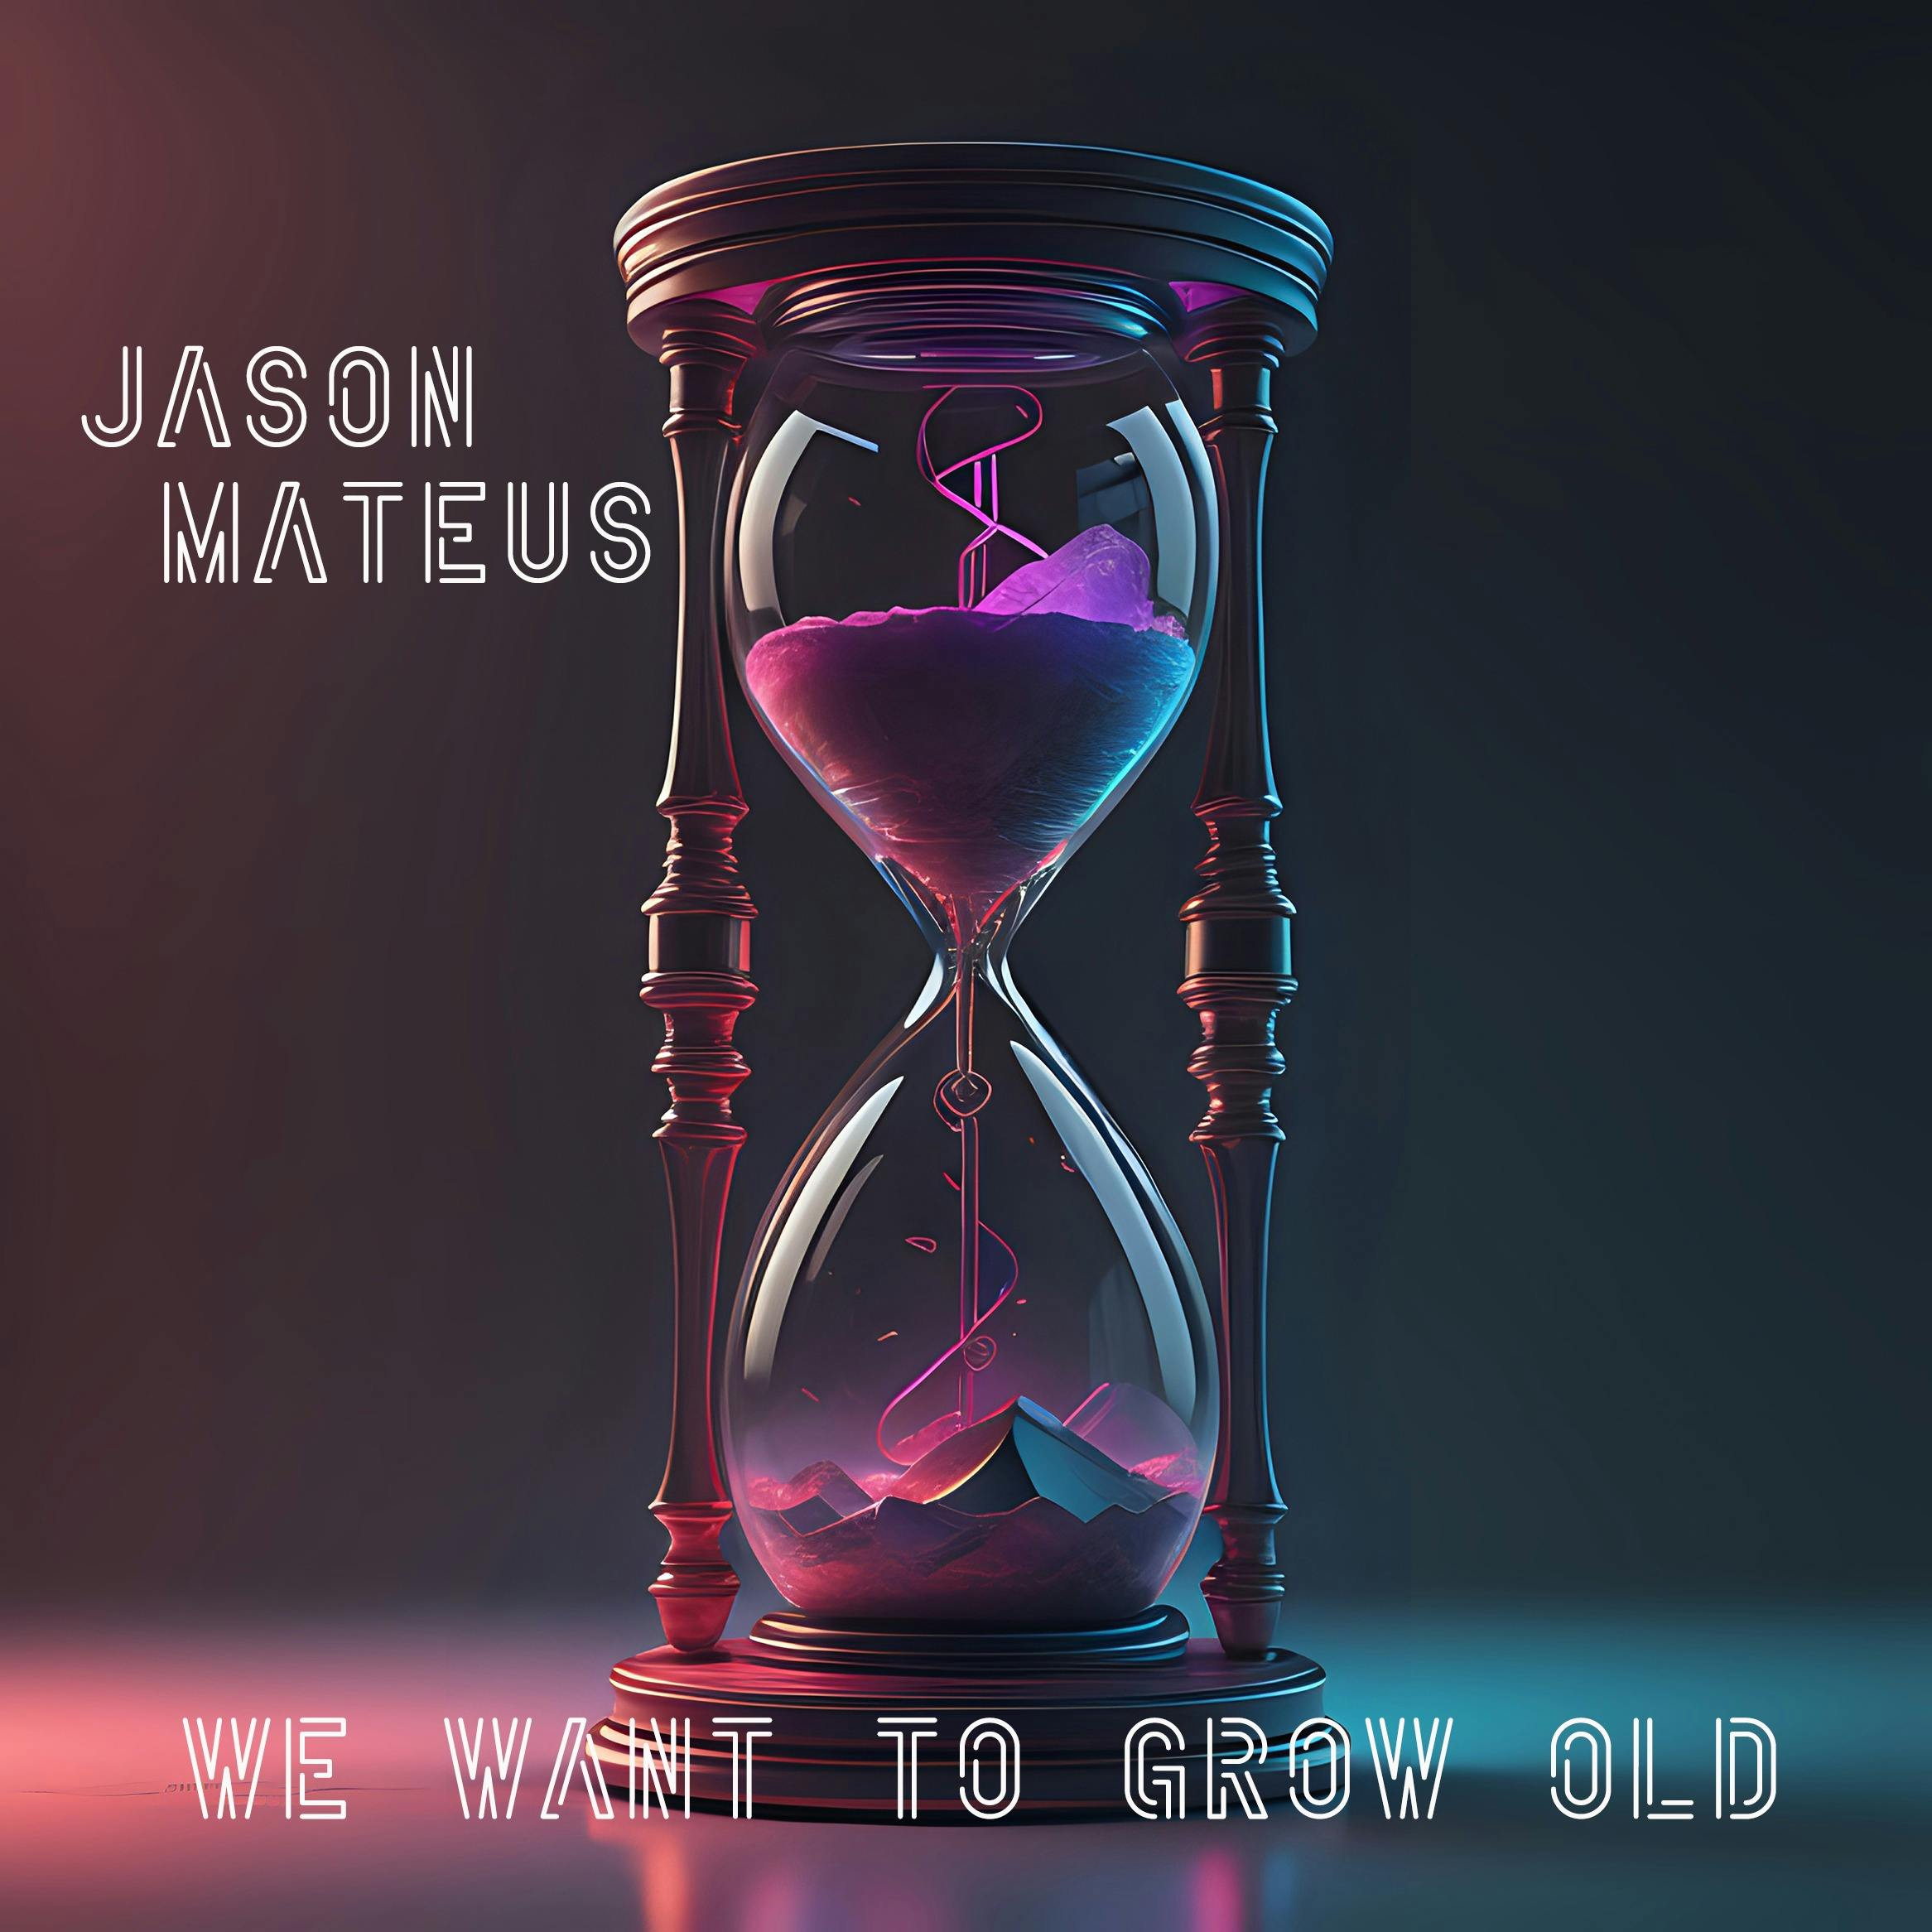 We want to grow old